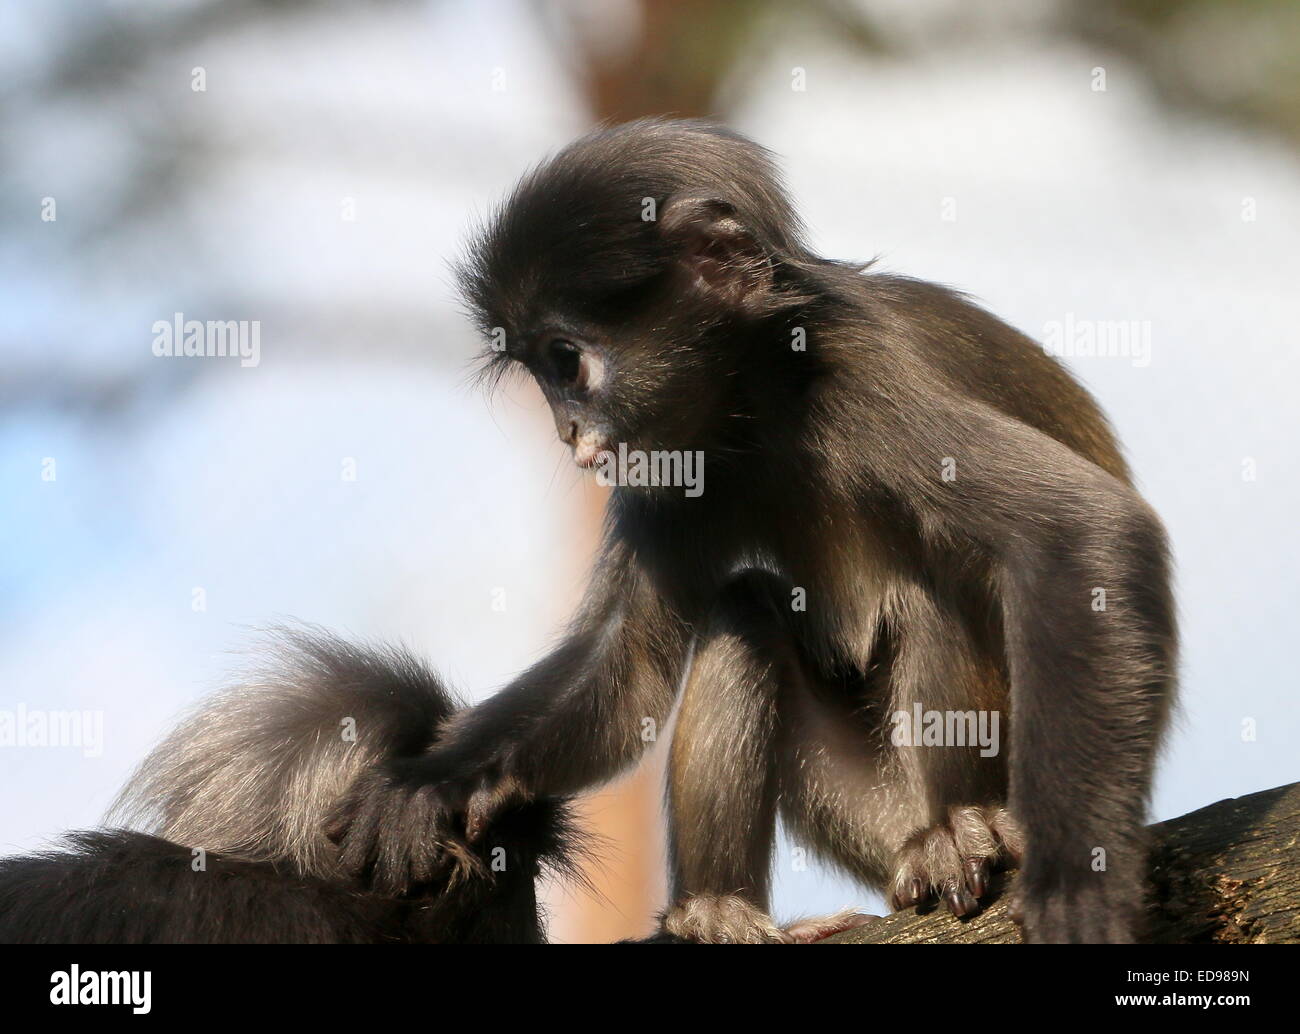 Young Southeast Asian Dusky leaf monkey (Trachypithecus obscurus). A.k.a Spectacled langur or spectacled leaf monkey Stock Photo